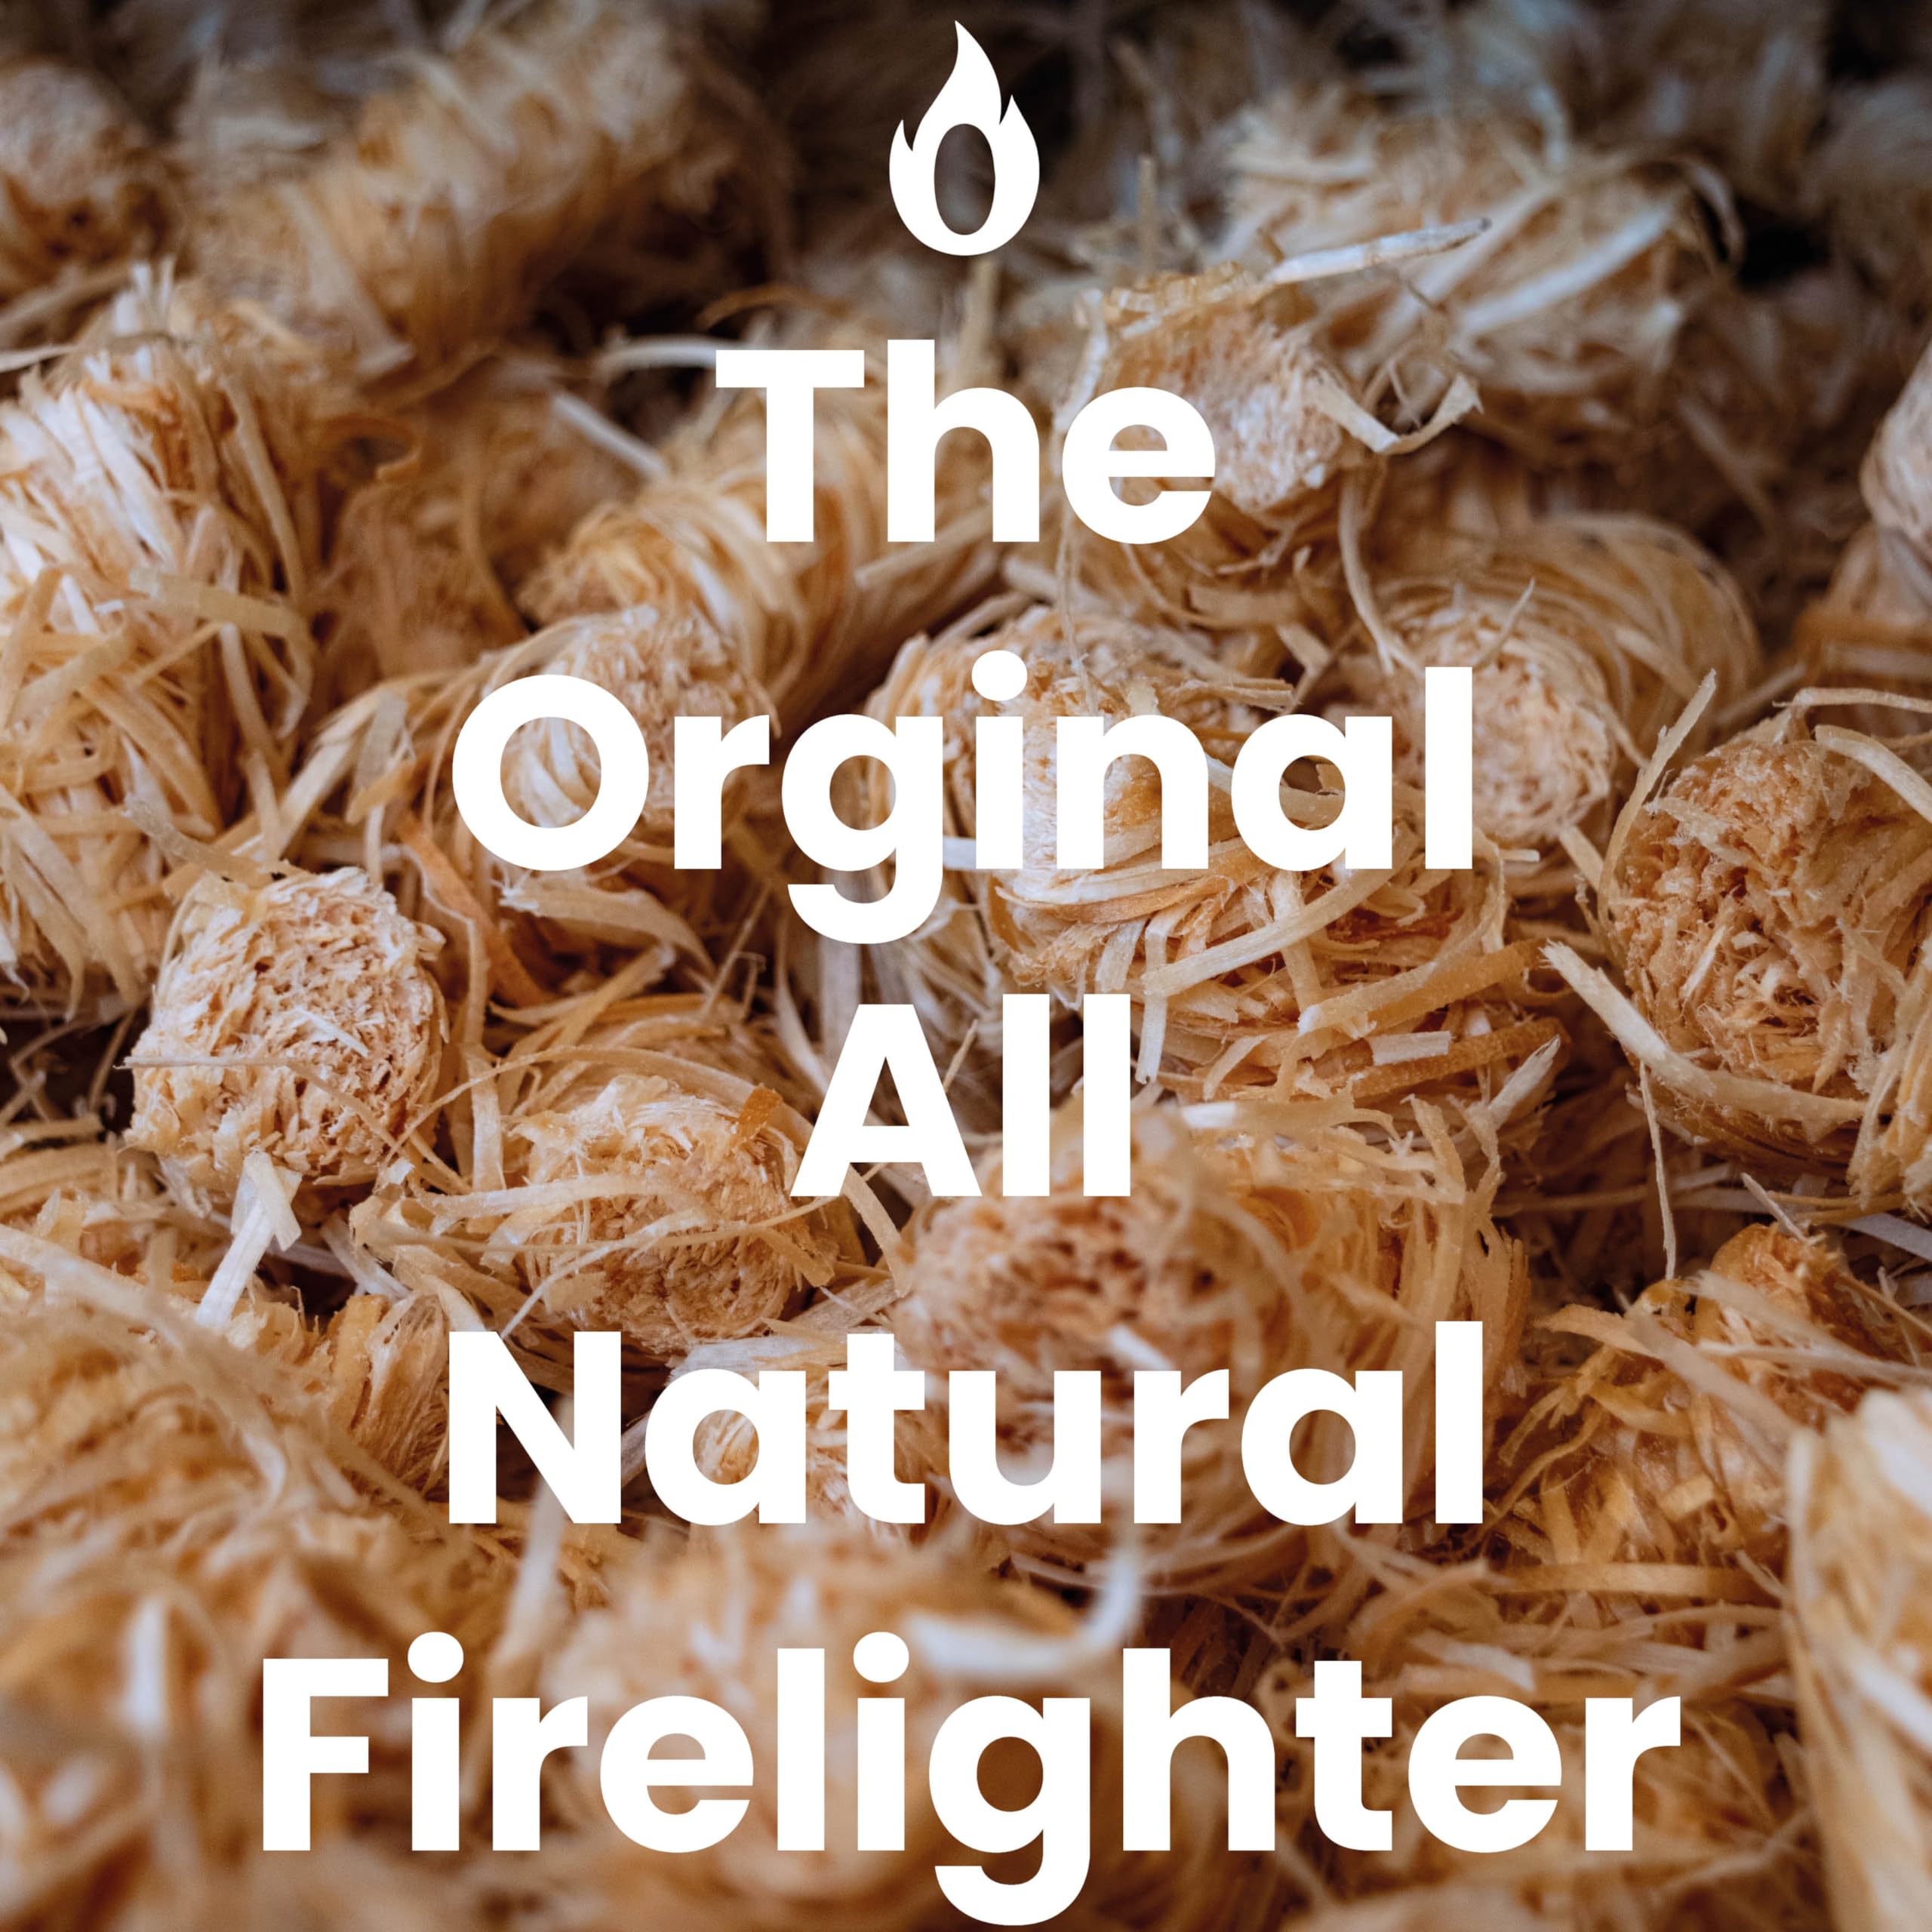 Ecoblaze 50 Natural Firelighters - Fire Lighters for Wood & Log Burners - Wood Wool Fire Starters for BBQ & Pizza Oven Firestarters - Safe, Clean & Odourless Wax Coated Instant Firestarters